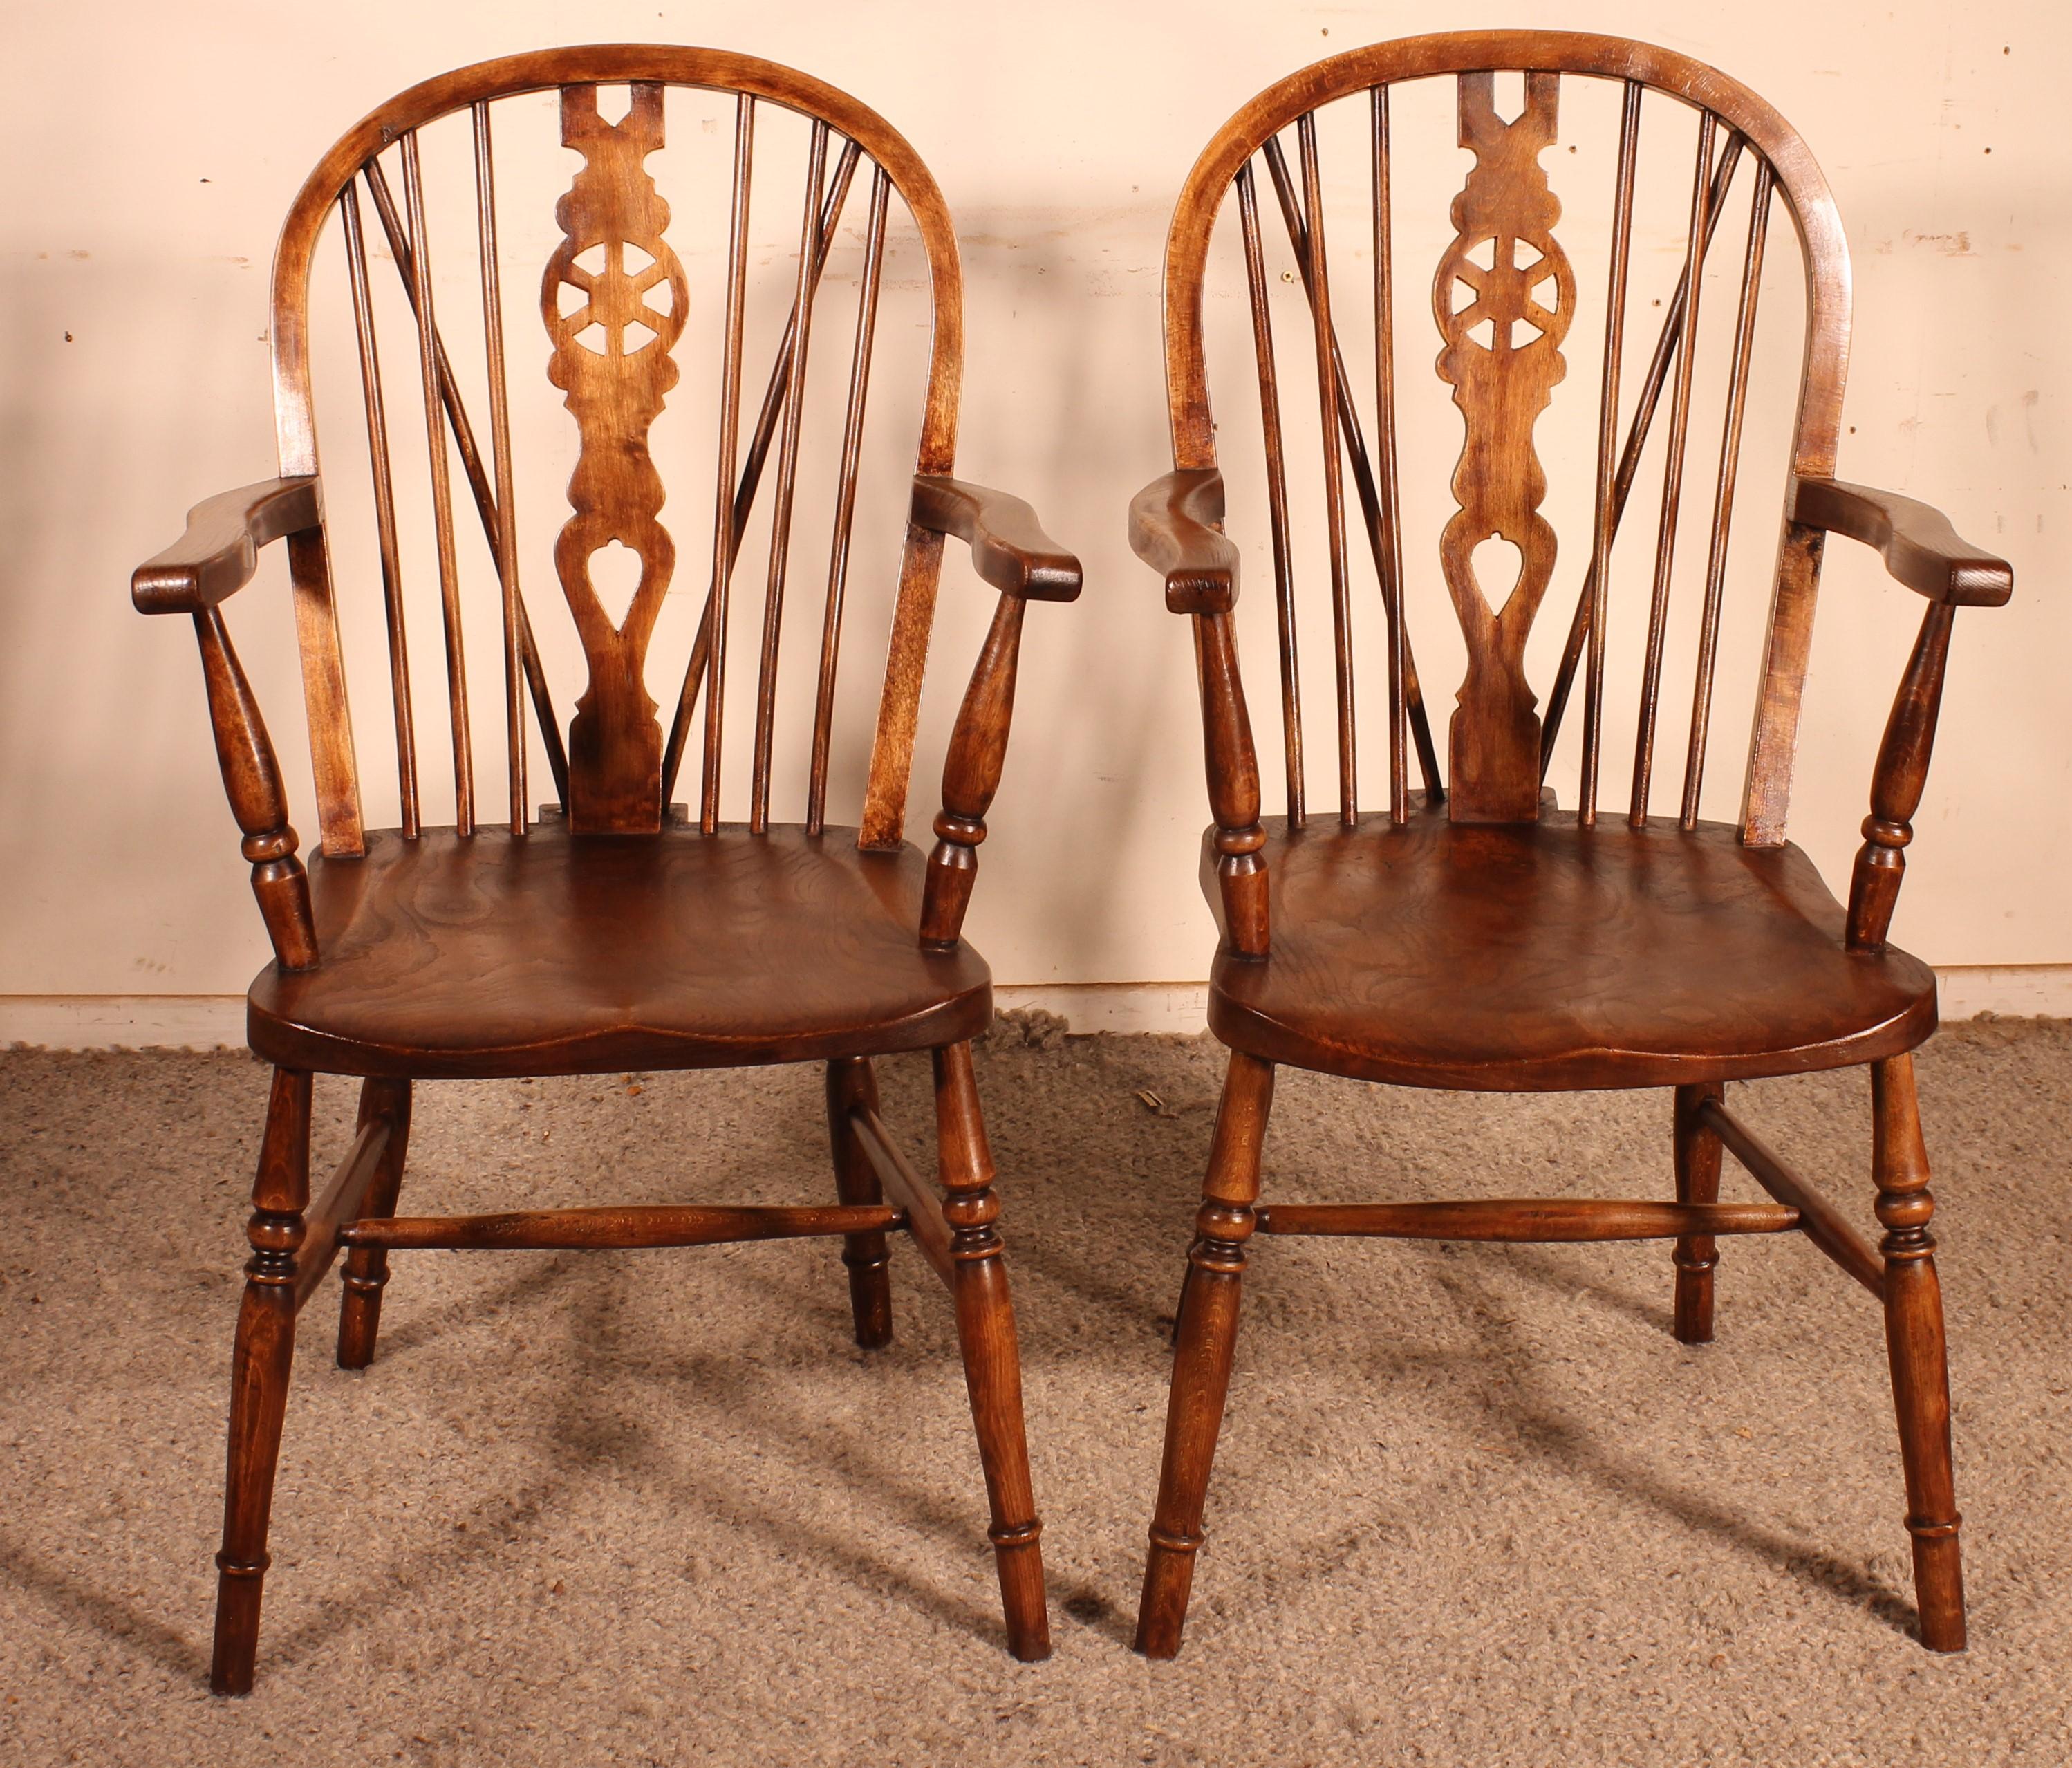 a fine pair of English windsor armchairs from the 19th century in elm and chestnut

Very beautiful armchairs of good quality and which have an elegant base and a decoration on the back called Wheelback

Very beautiful patina and in superb